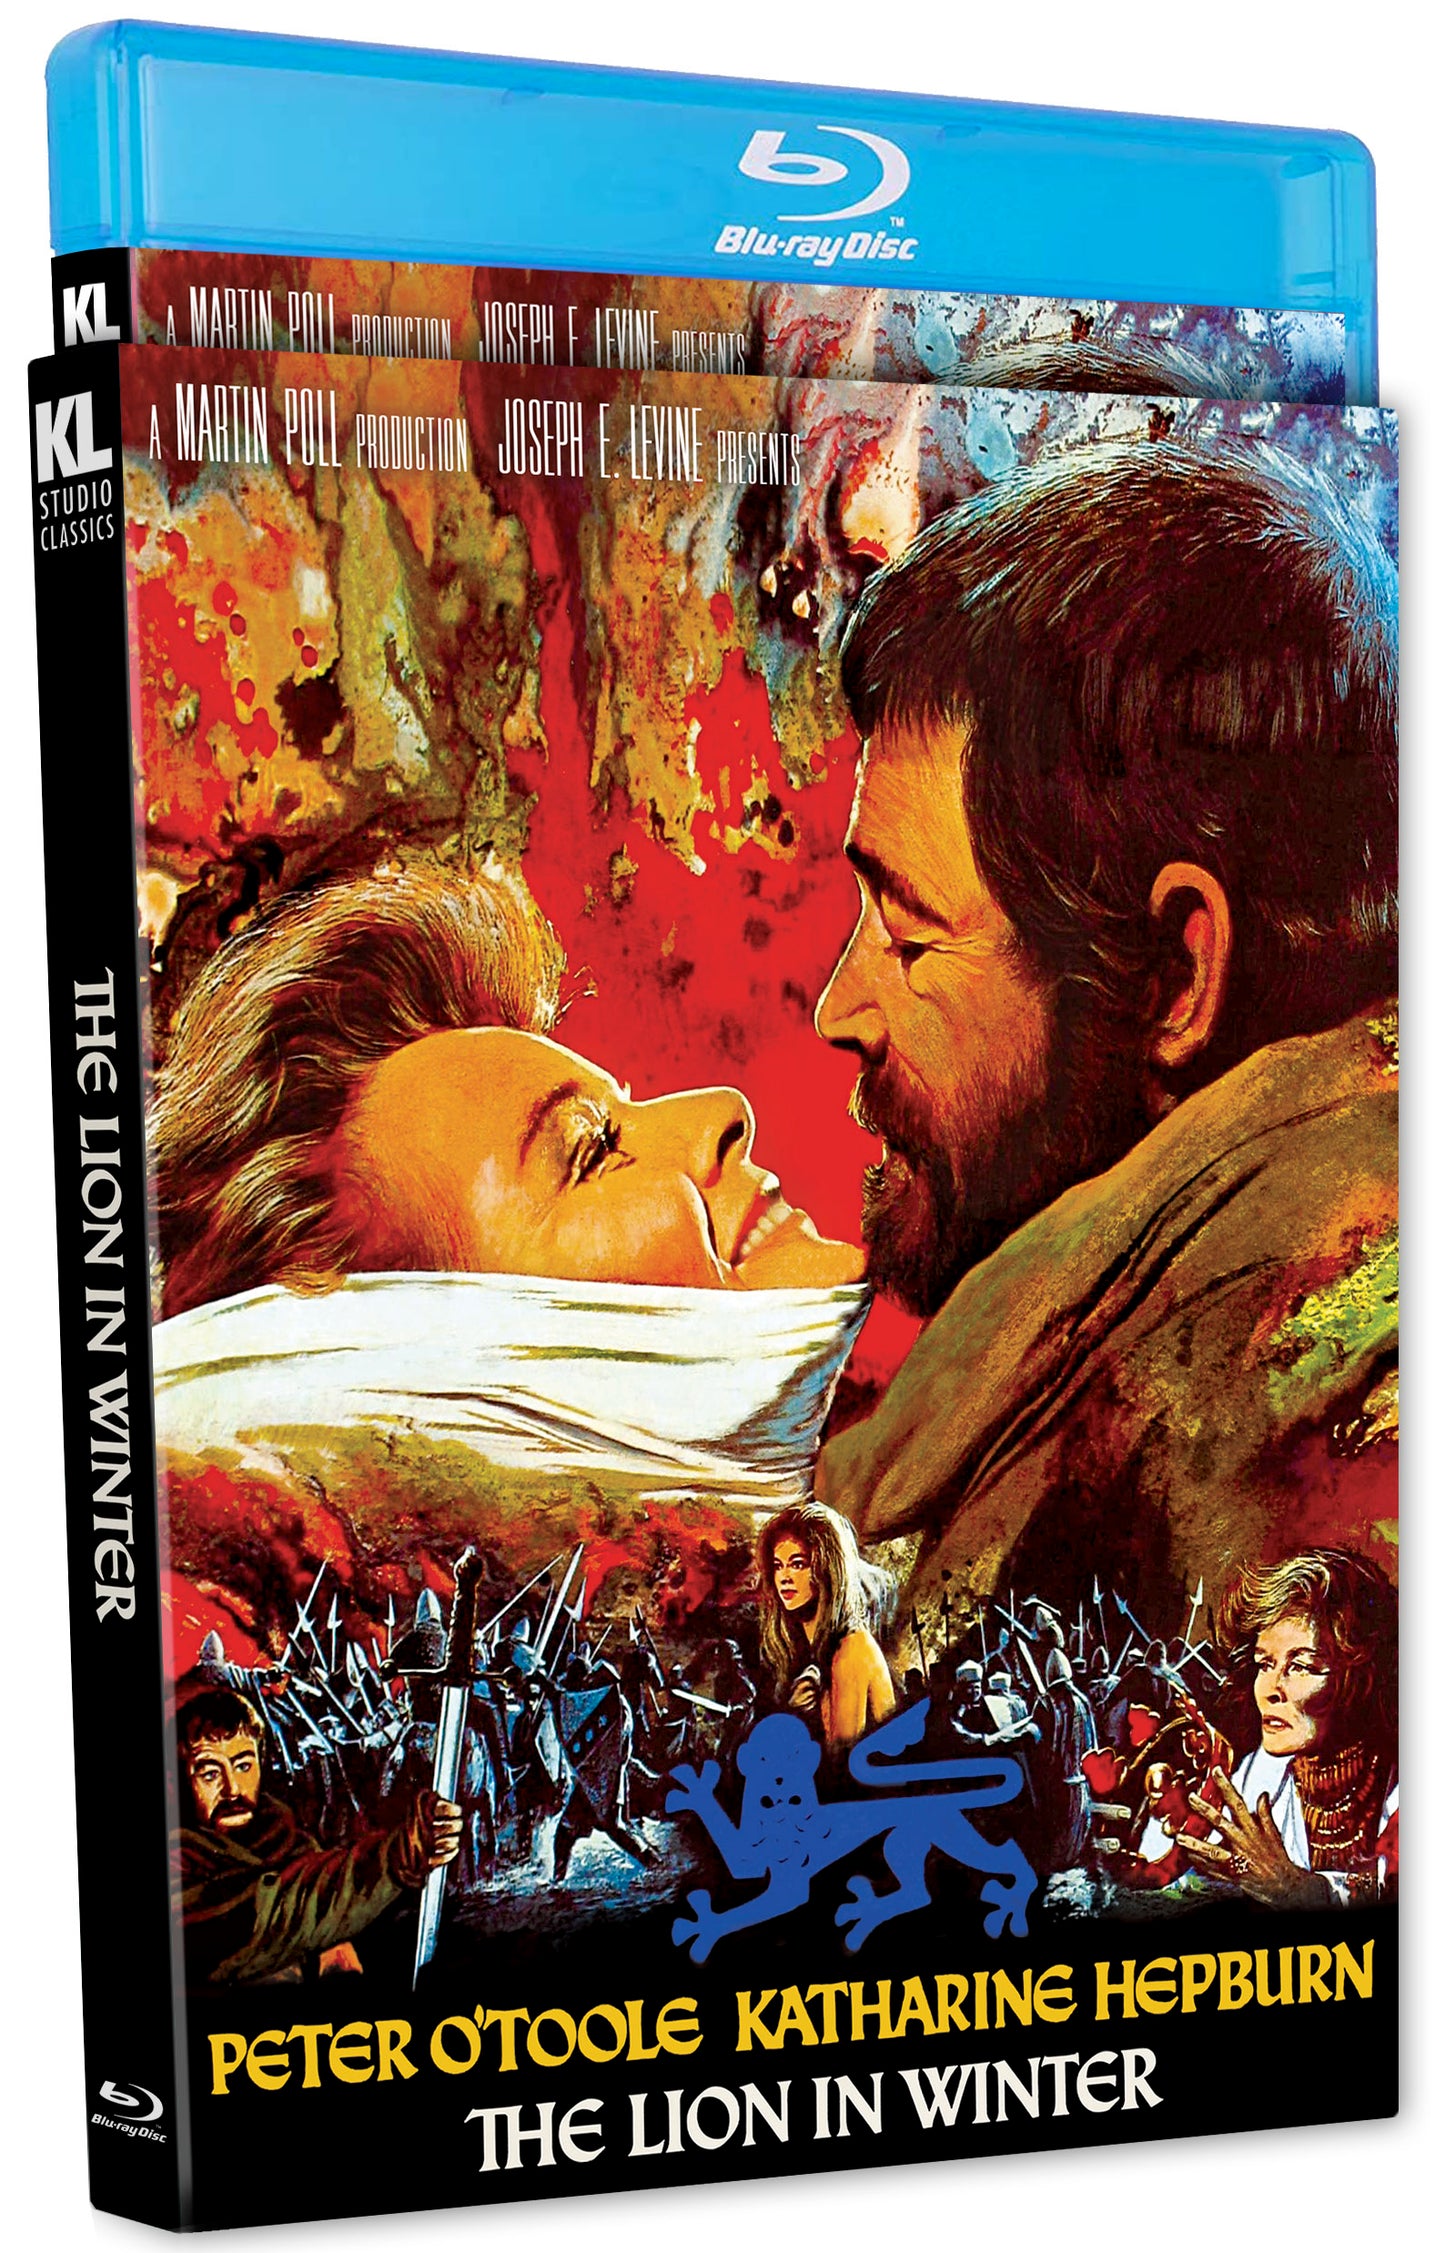 The Lion in Winter Blu-ray Special Edition with Slipcover (Kino Lorber) [Preorder]